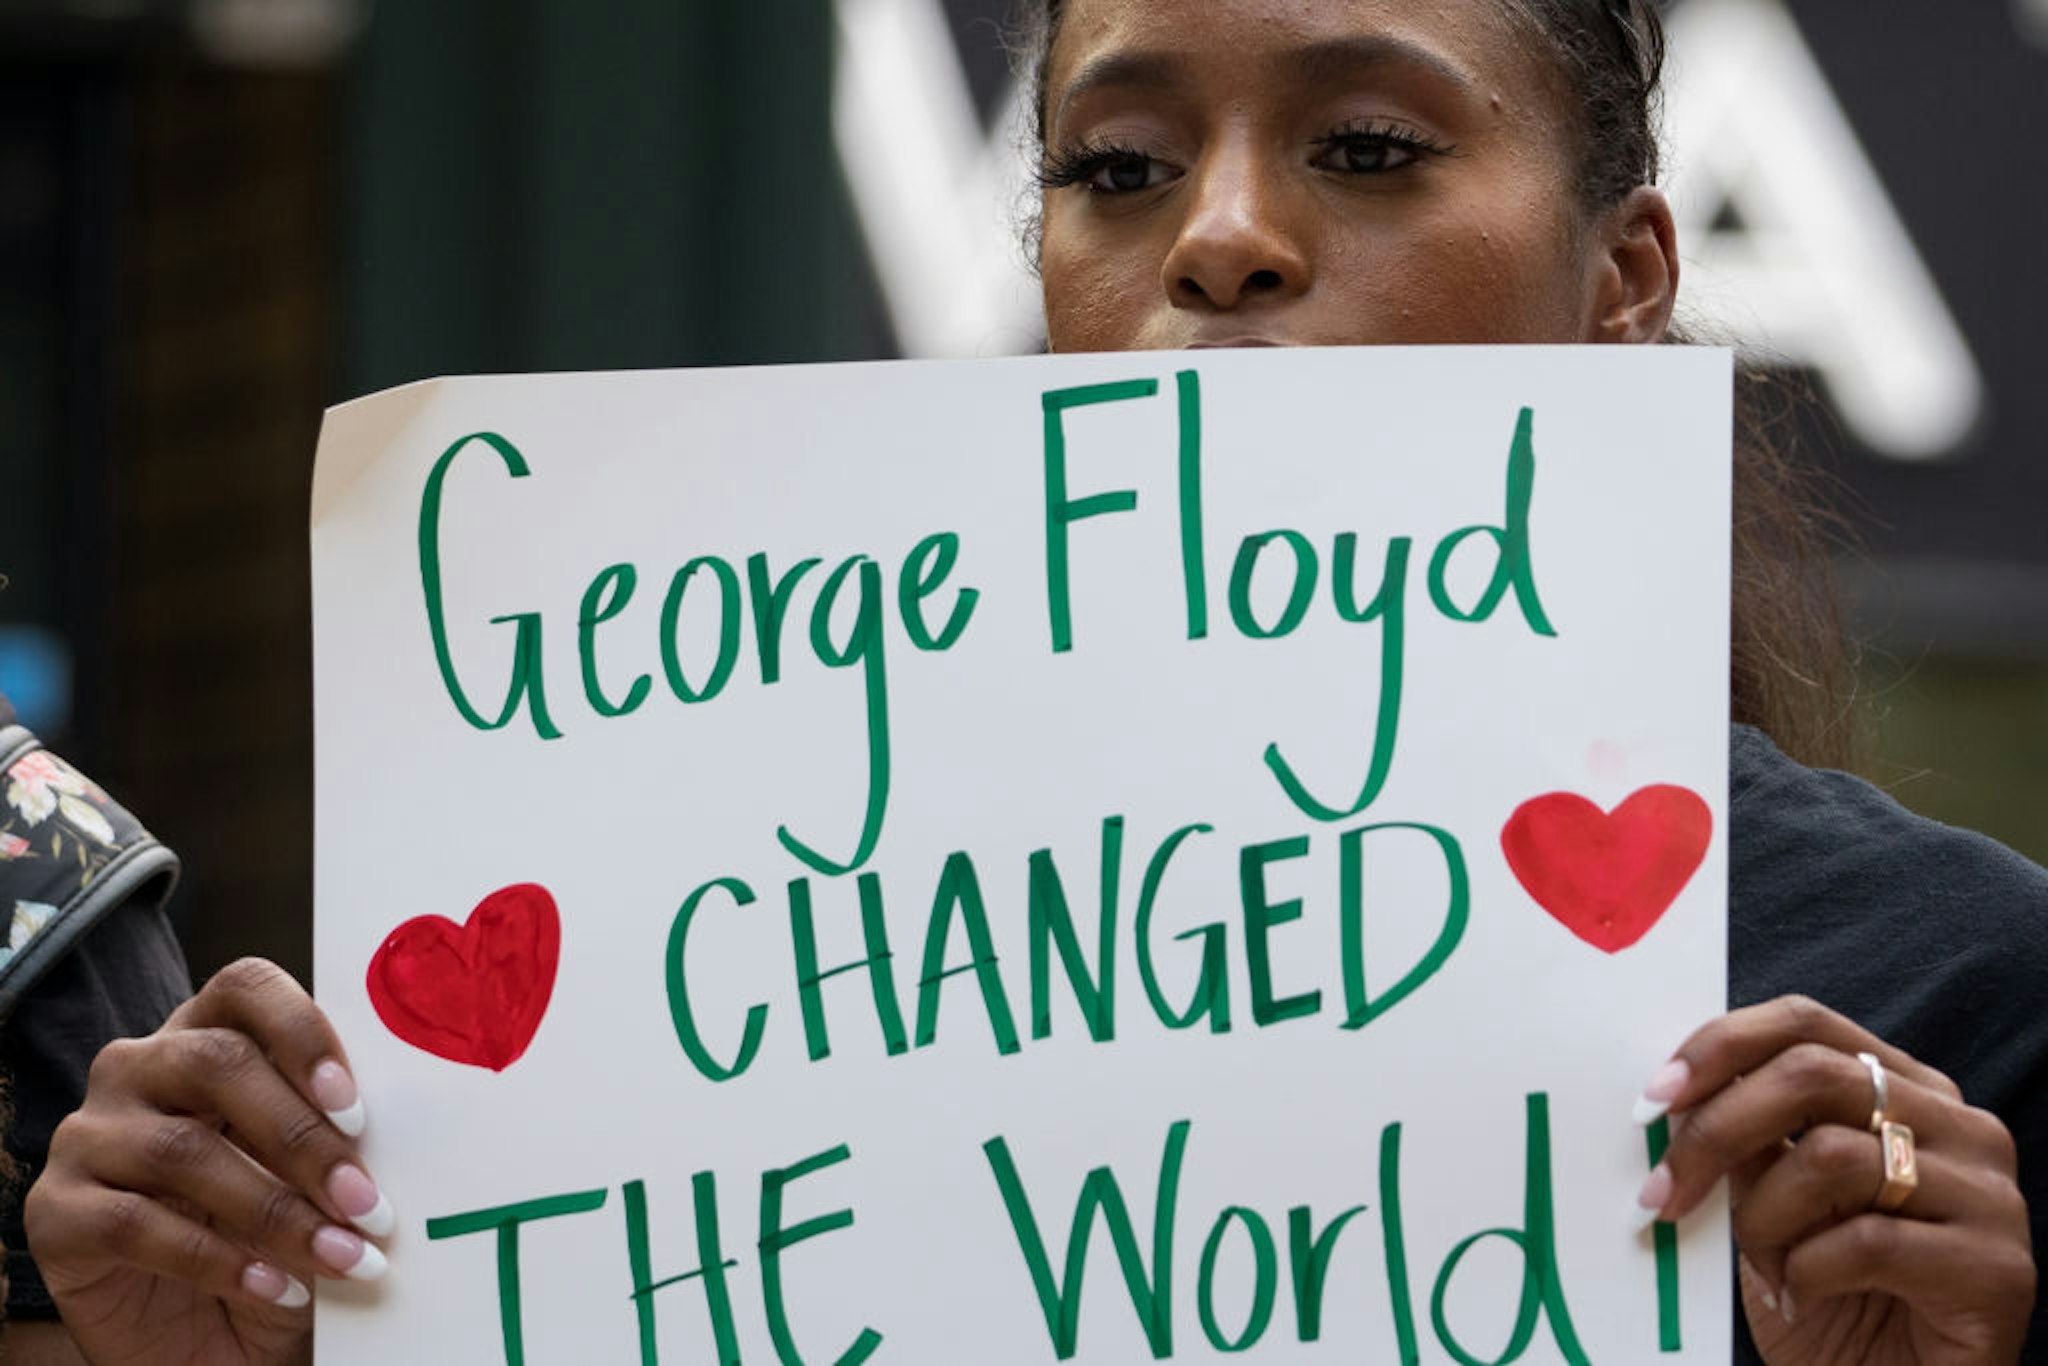 ATLANTA, GA - MAY 25: People gather to march and memorialize the life of George Floyd on the anniversary of his death on May 25, 2021 in Atlanta, Georgia. Floyd's death at the hands of Minneapolis police officer Derek Chauvin sparked protests and movements around the world. (Photo by Megan Varner/Getty Images)